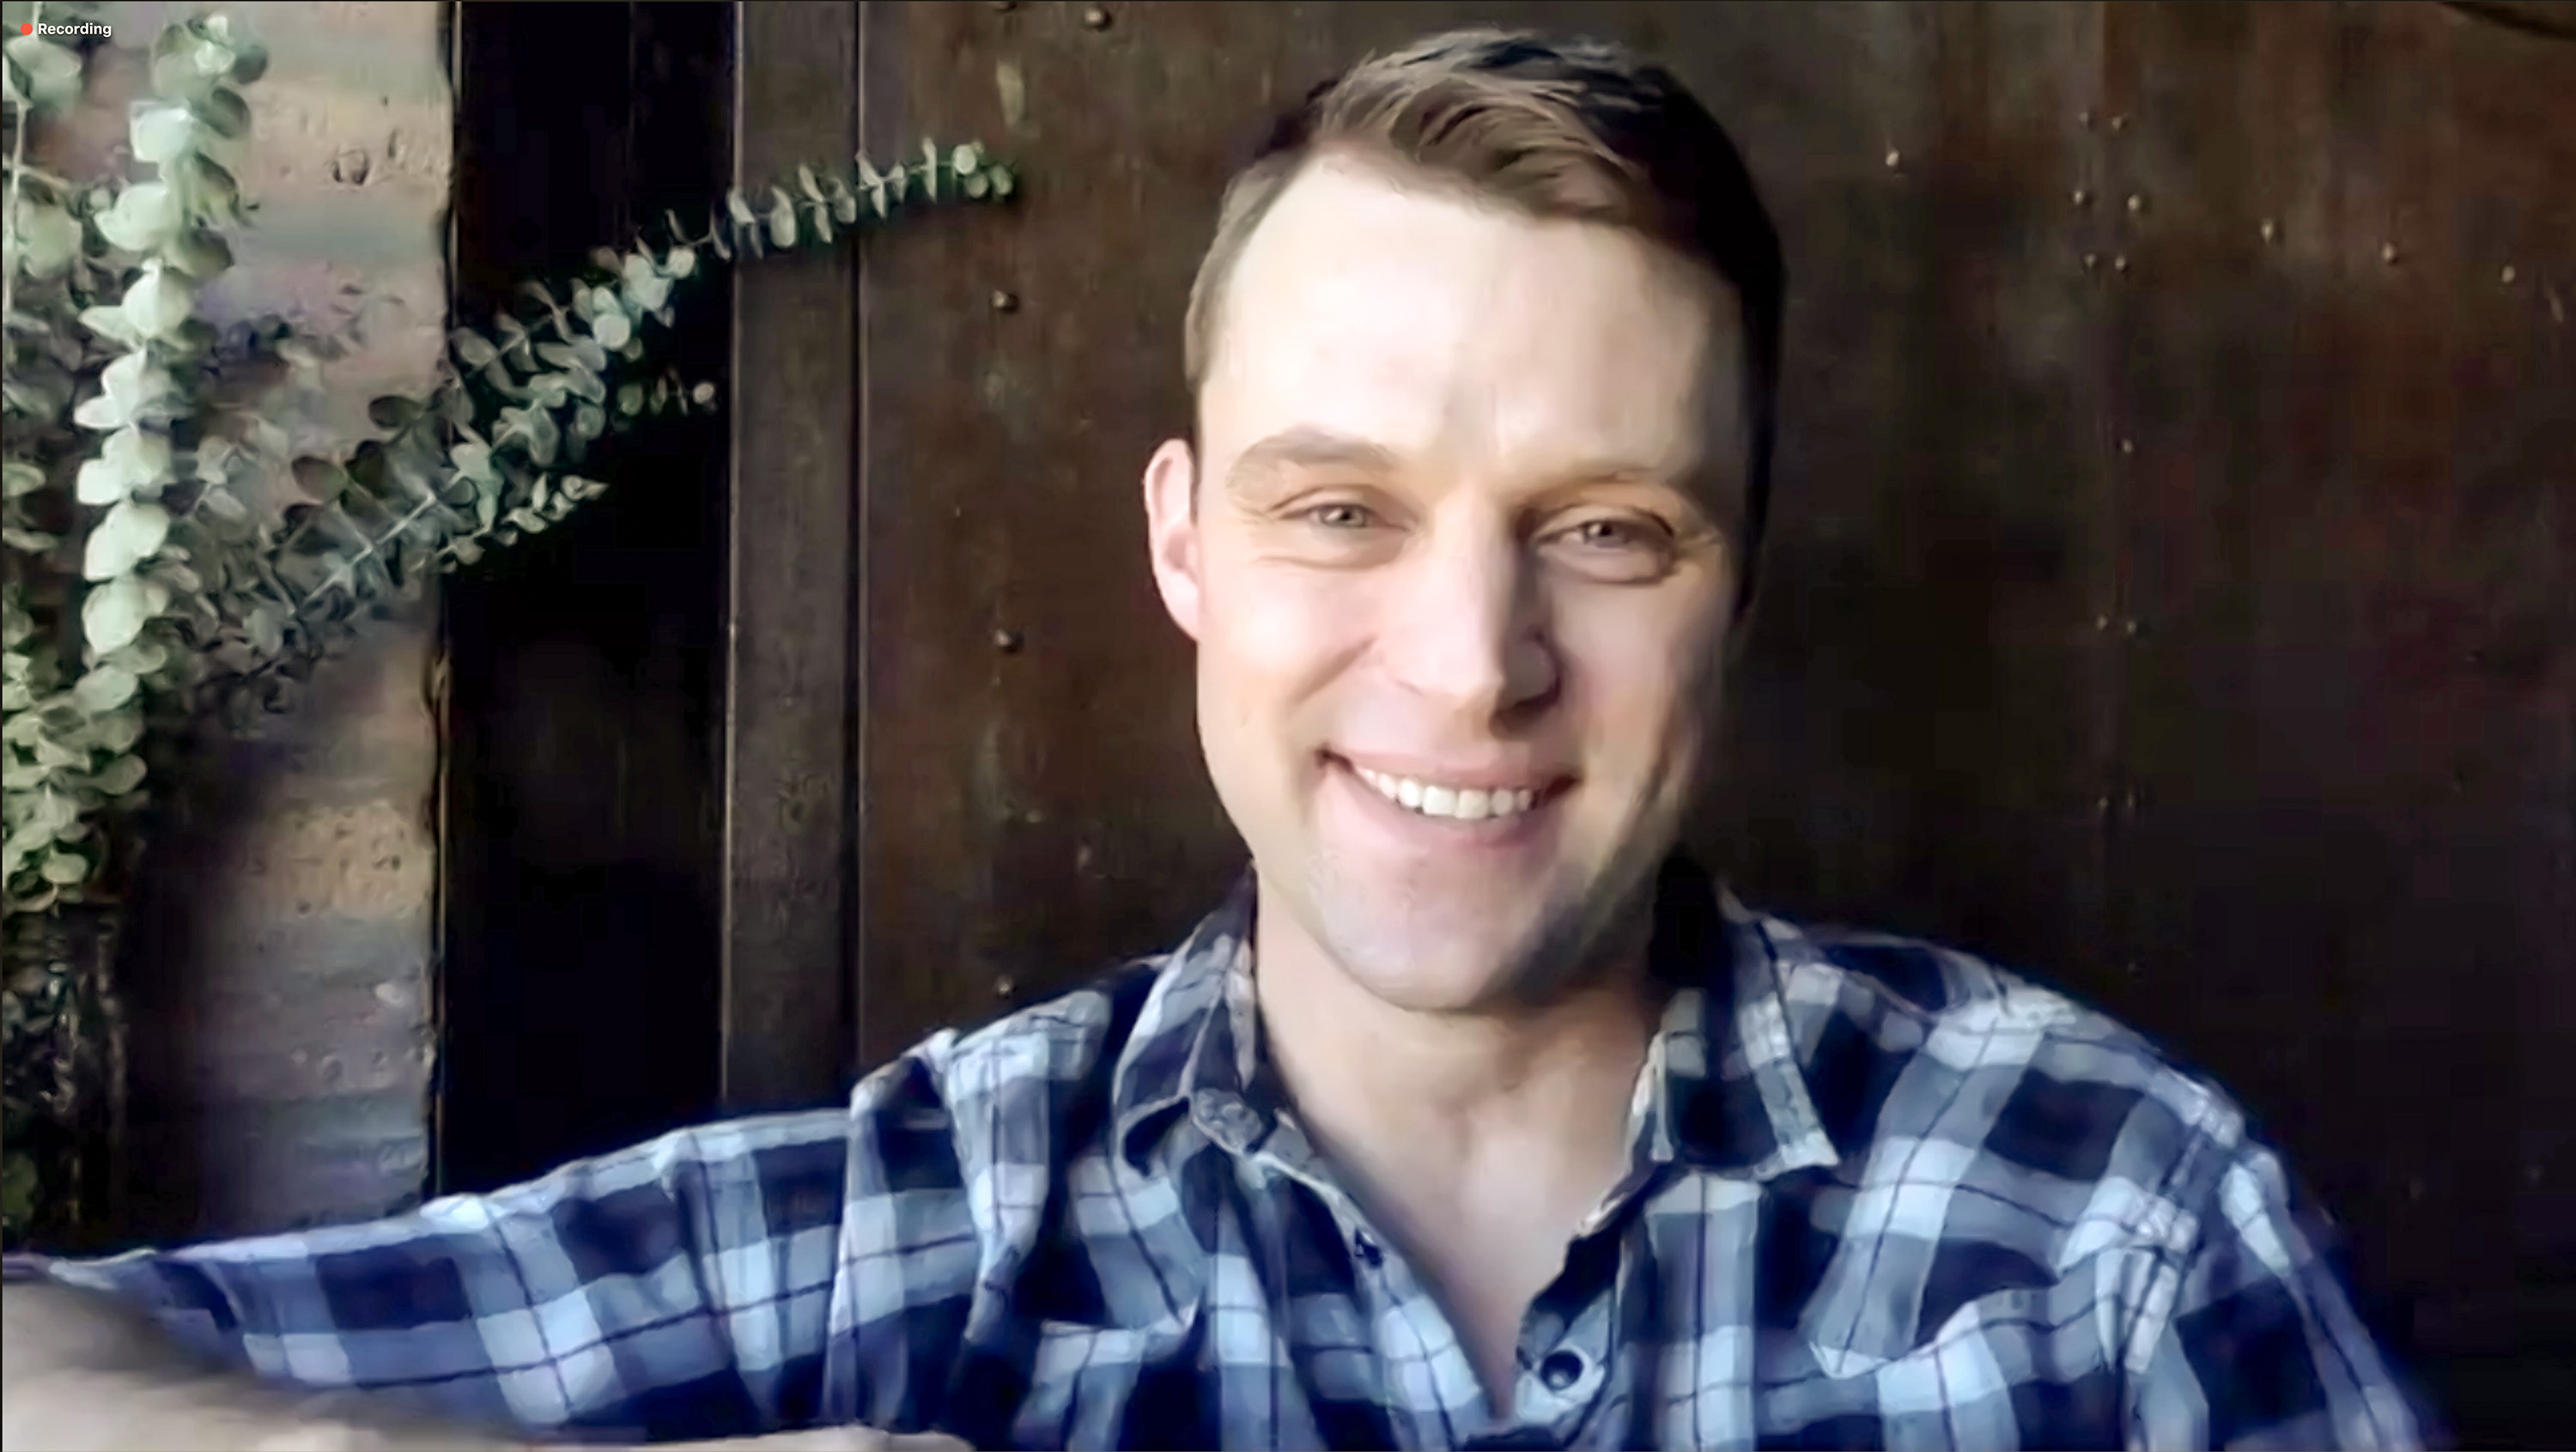 Chicago Fire: Jesse Spencer Net Worth and How He Became Famous